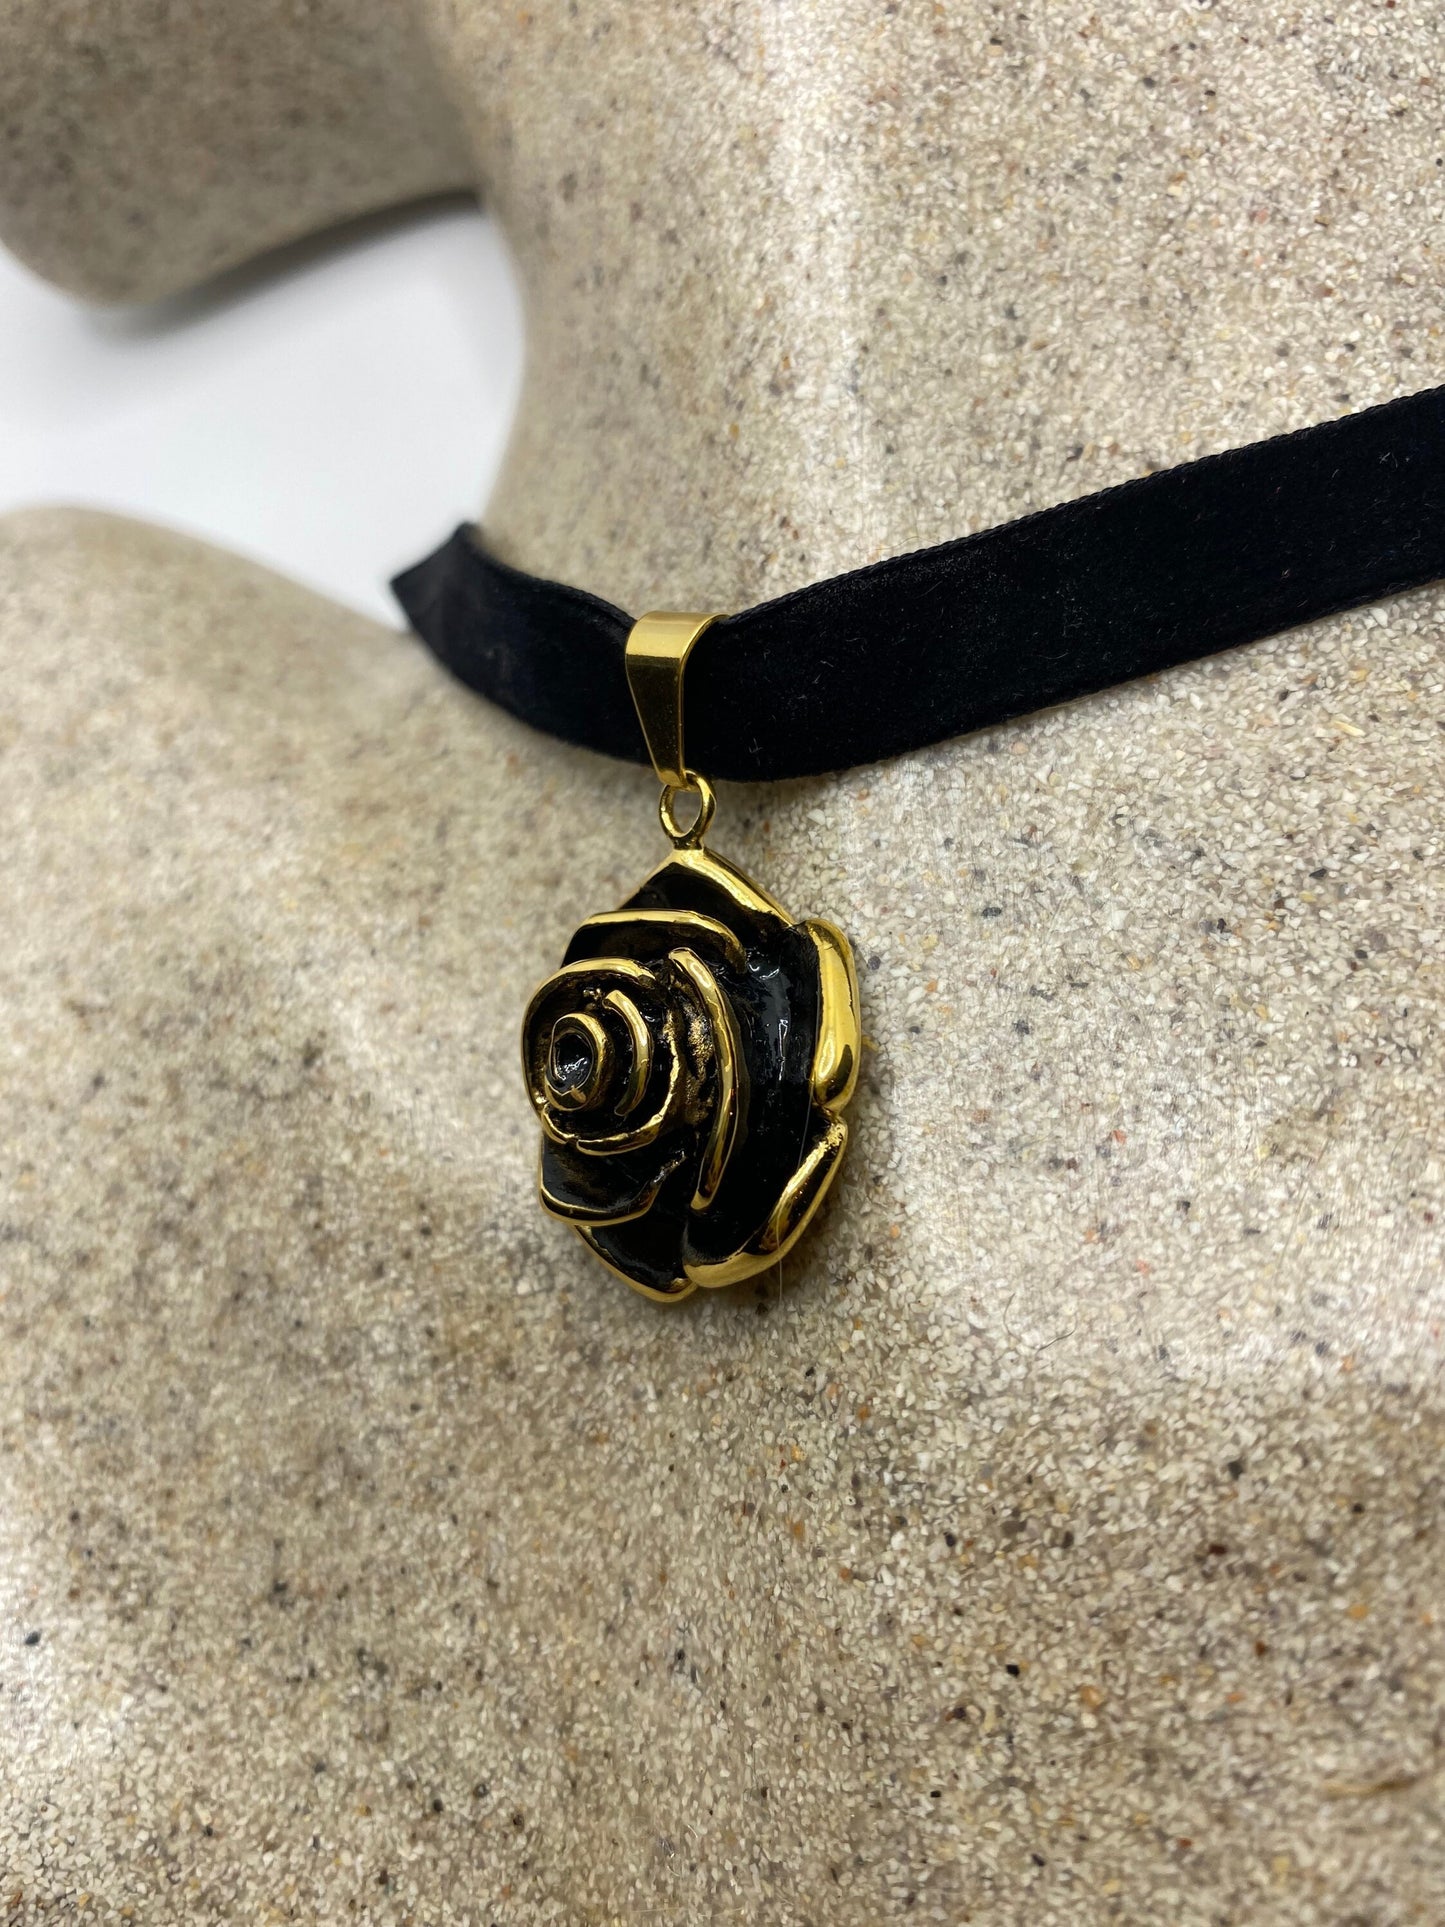 Vintage Rose Choker gold Stainless Steel Pendant Necklace